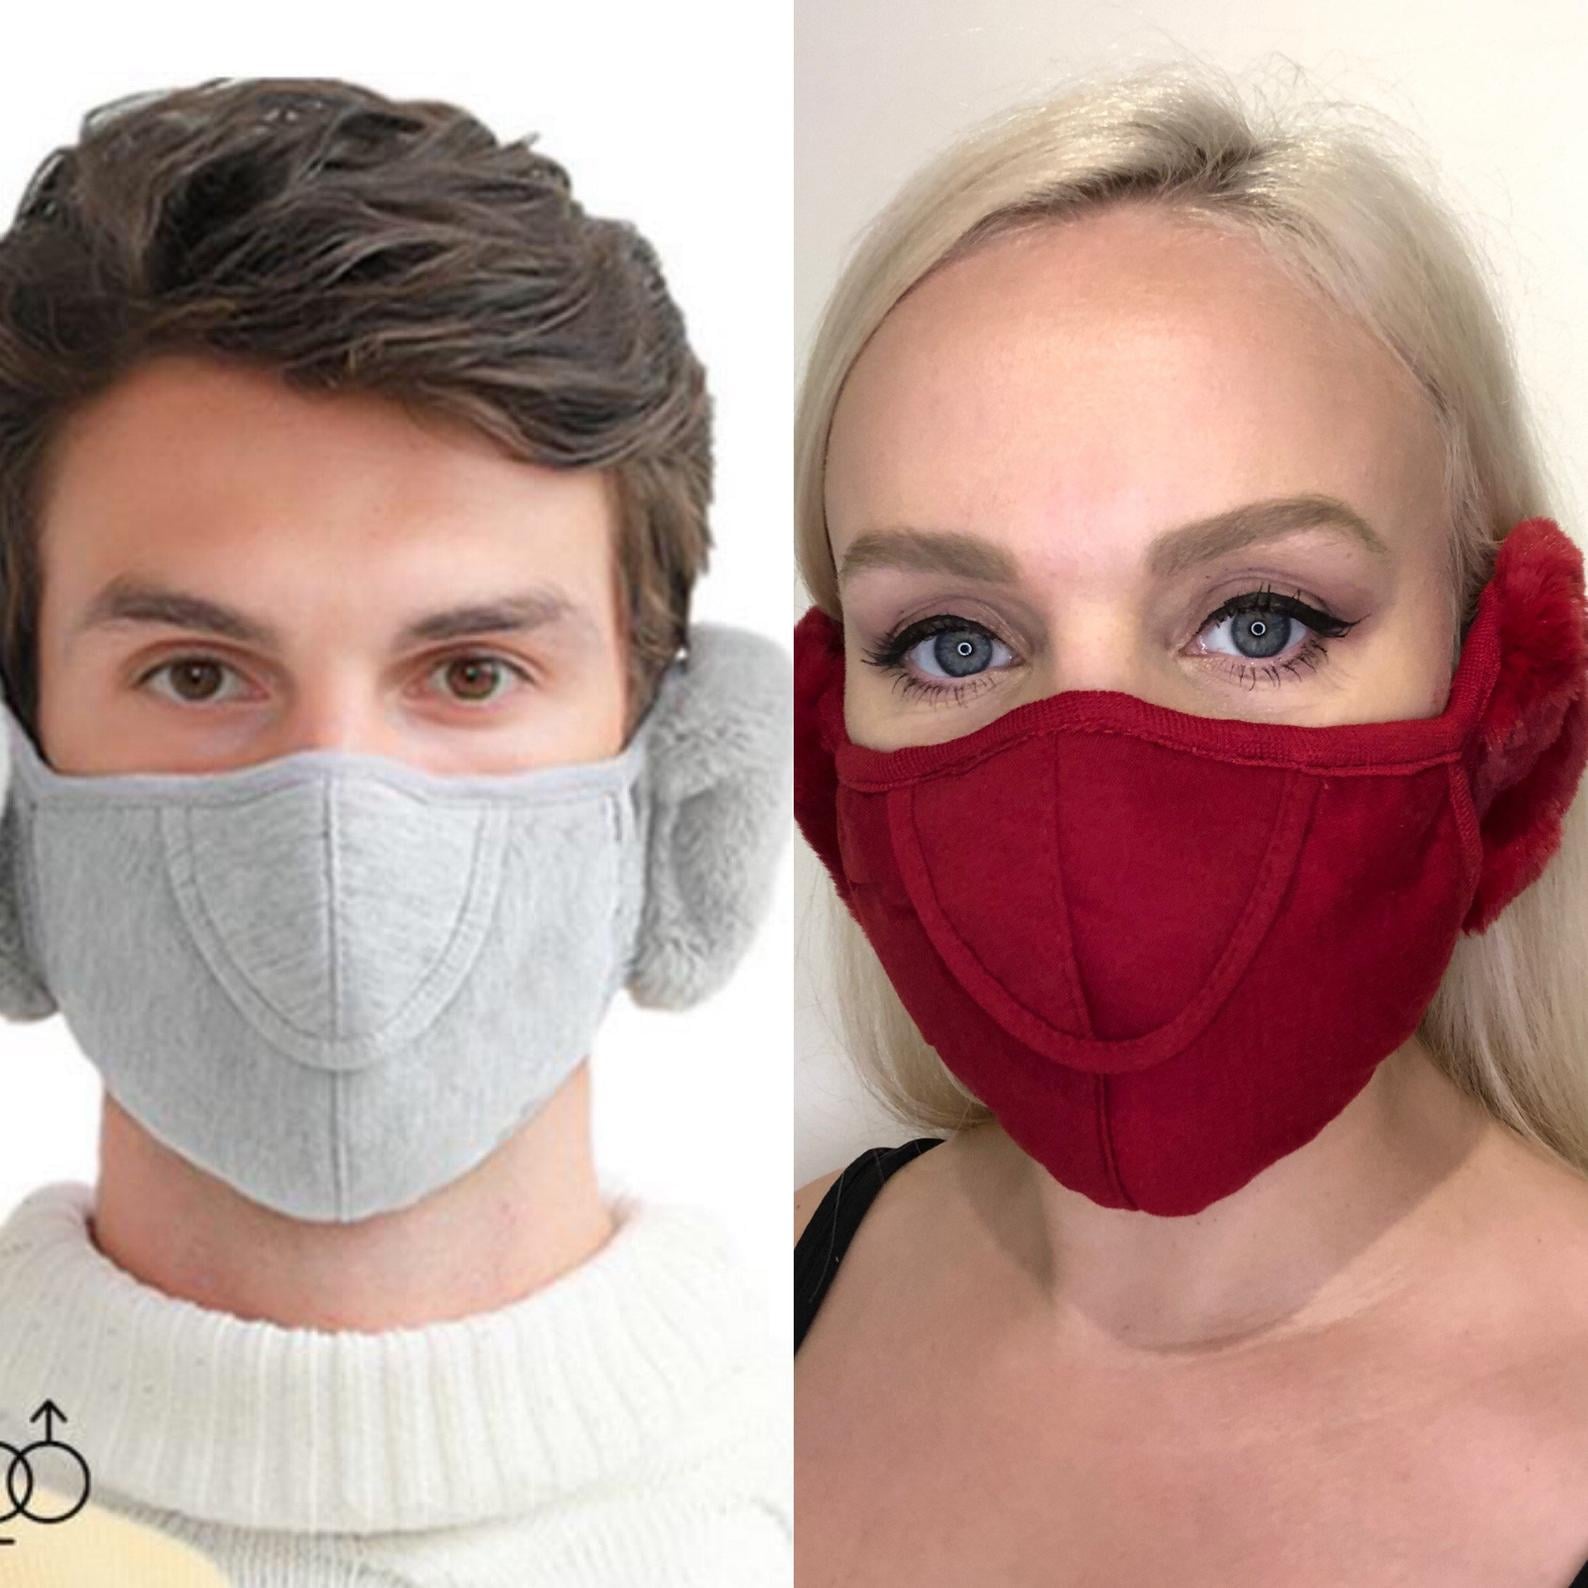 Face Mask With Ear Muff | 19 Warm Face Masks That Are Going to Be Wintertime Necessities | POPSUGAR Smart Living Photo 6